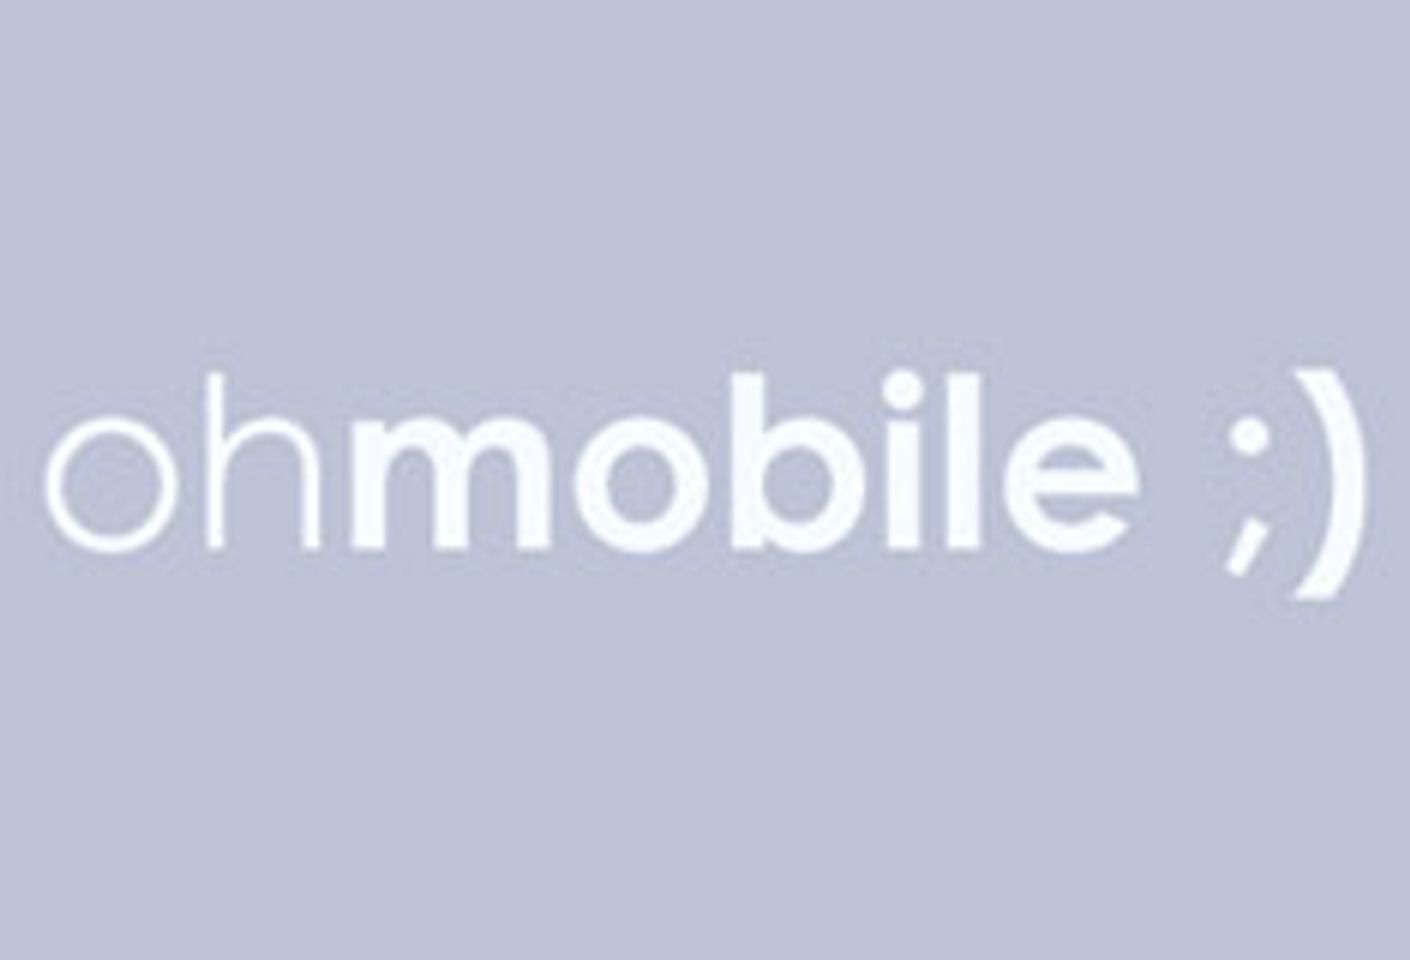 OhMobile Keeps Getting Bigger